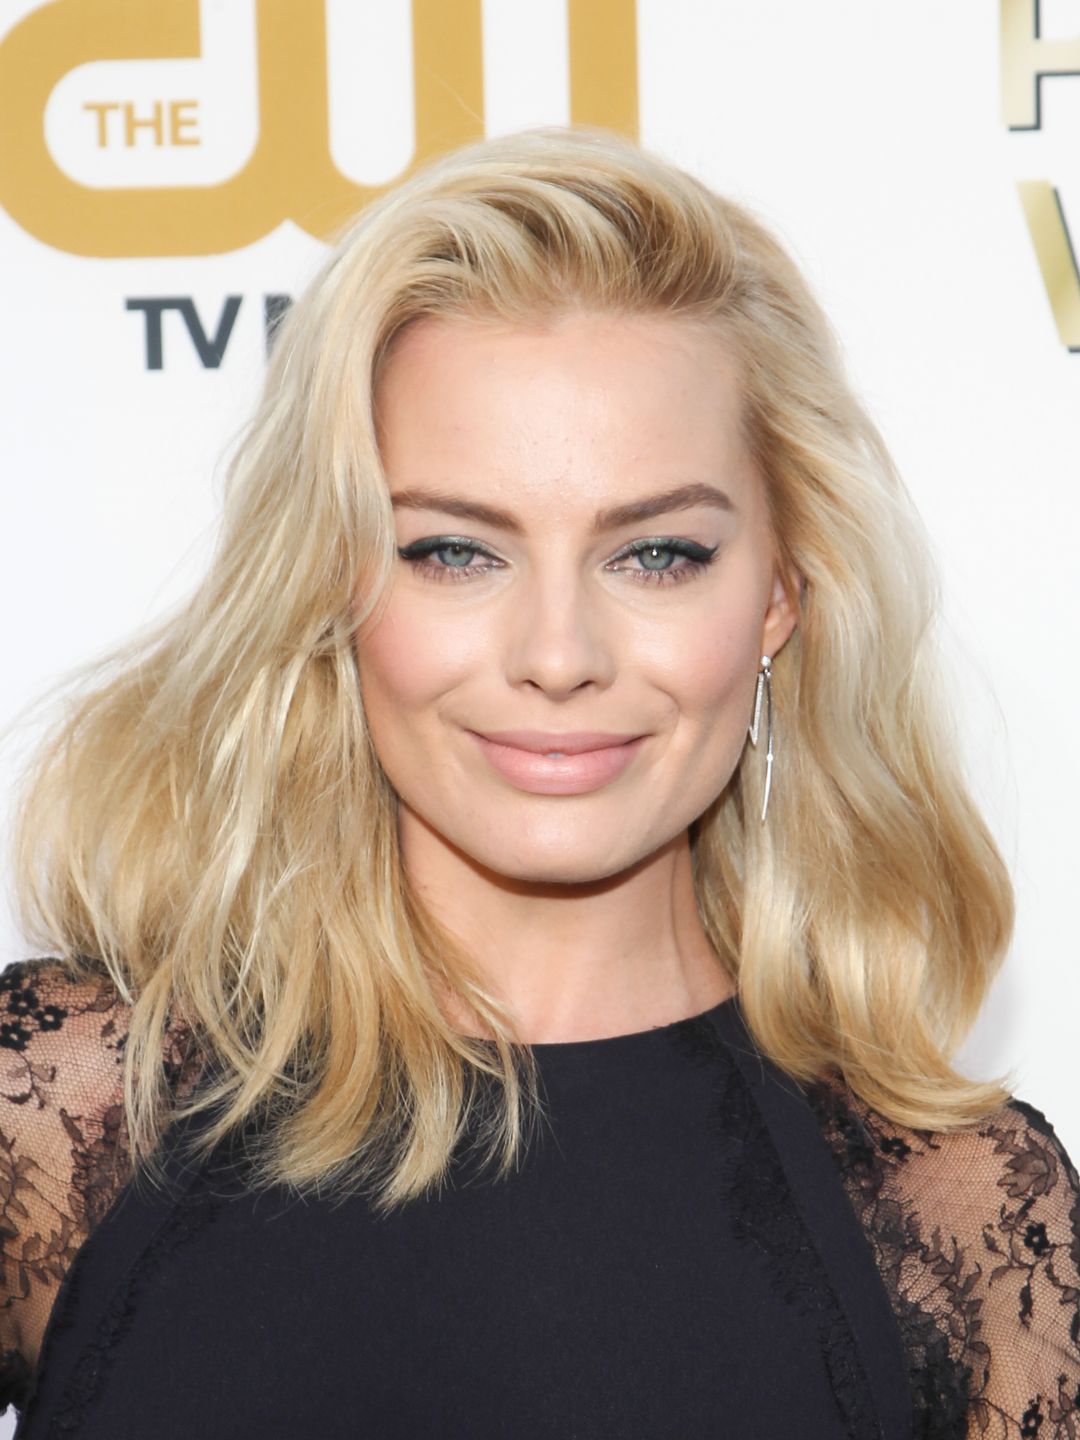 Margot Robbie young pics